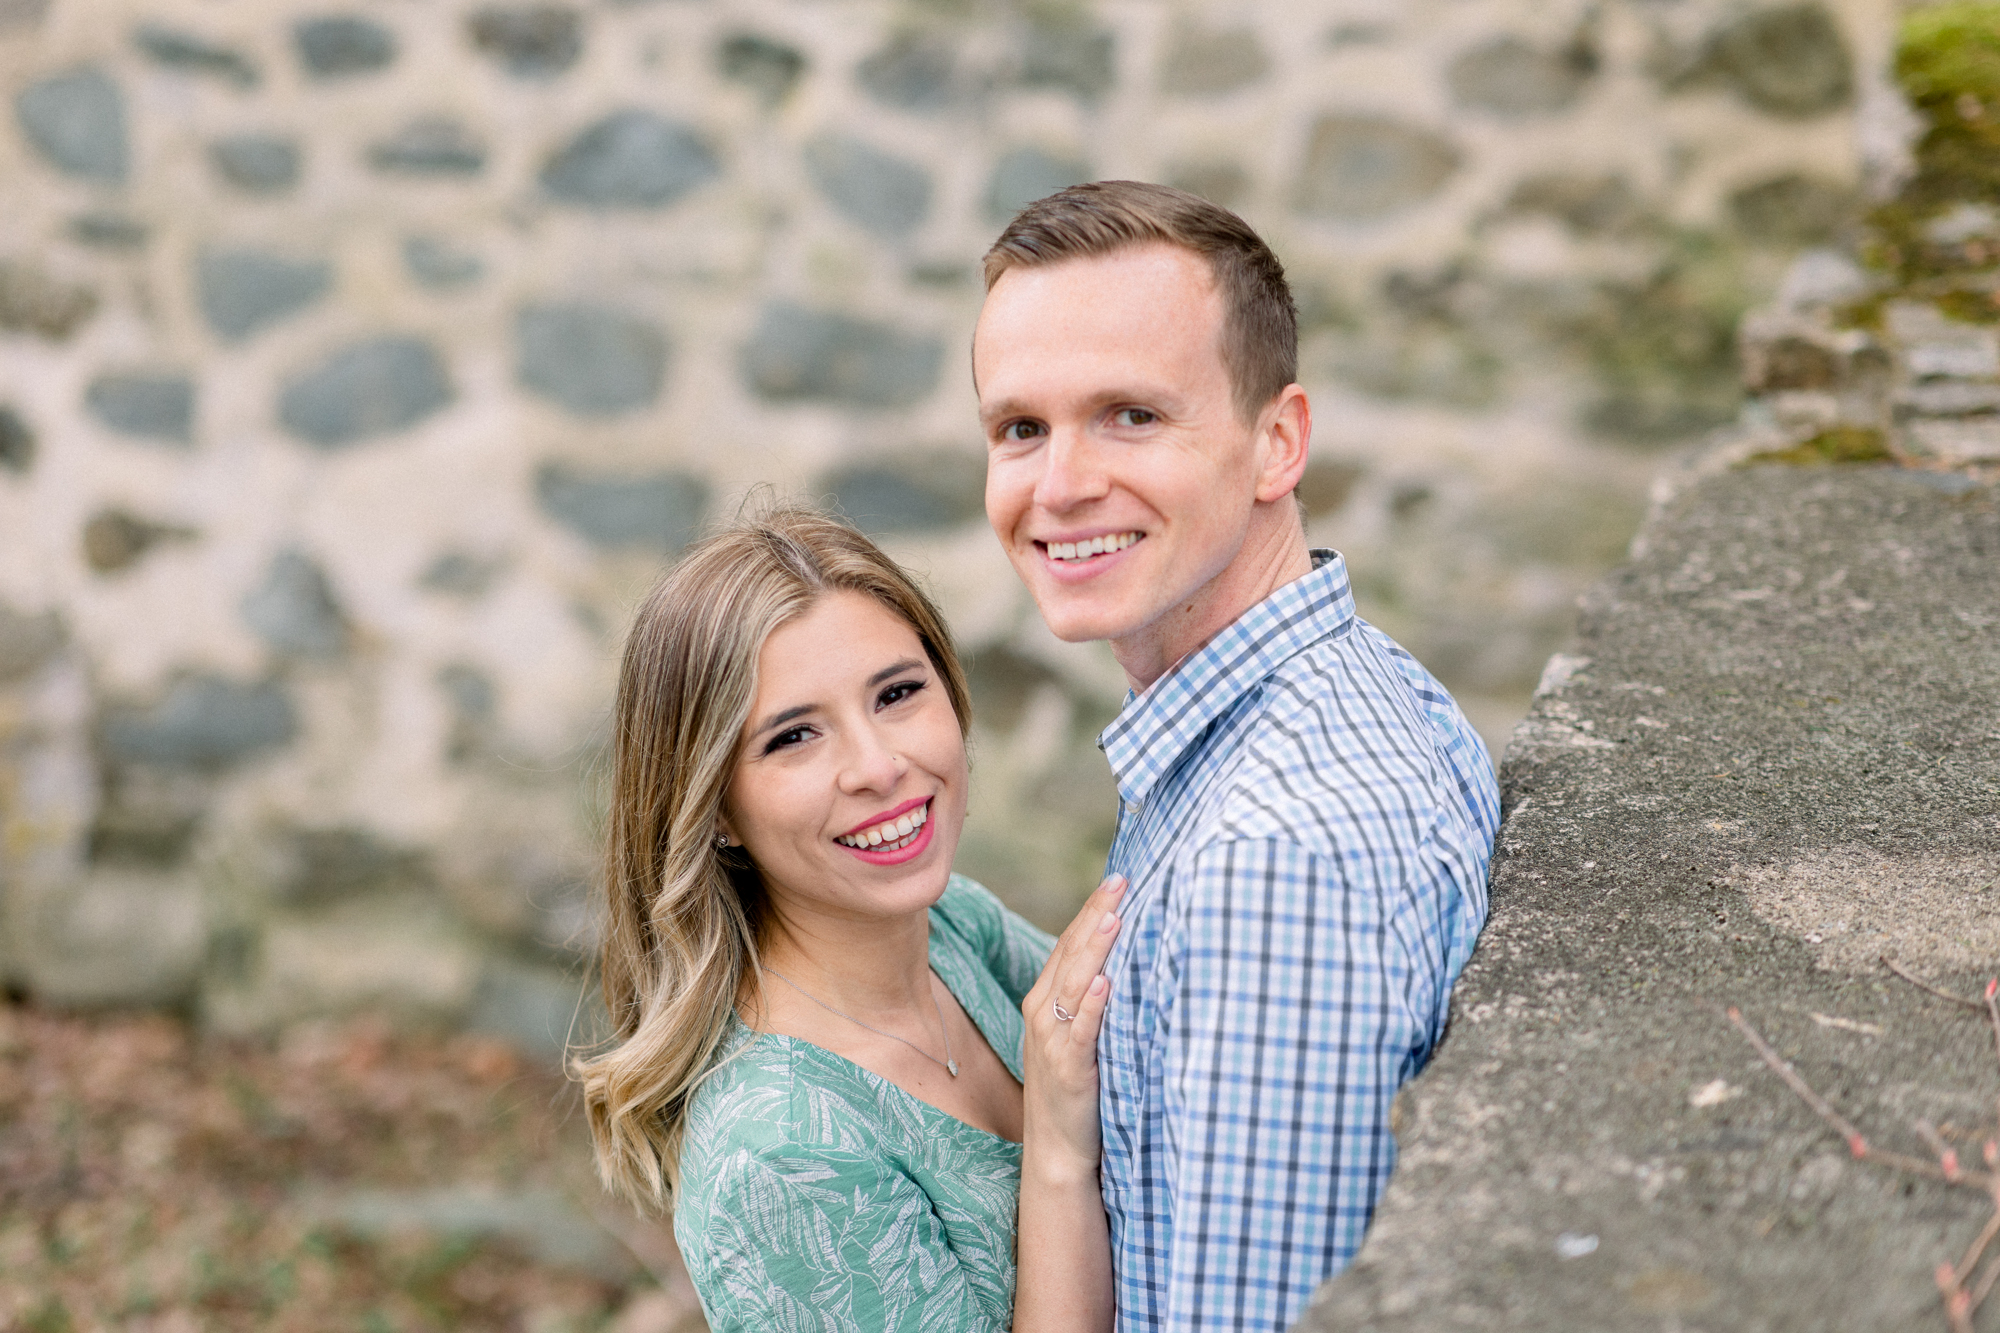 Cheerful Waterloo Village Engagement Photos in Springy New Jersey